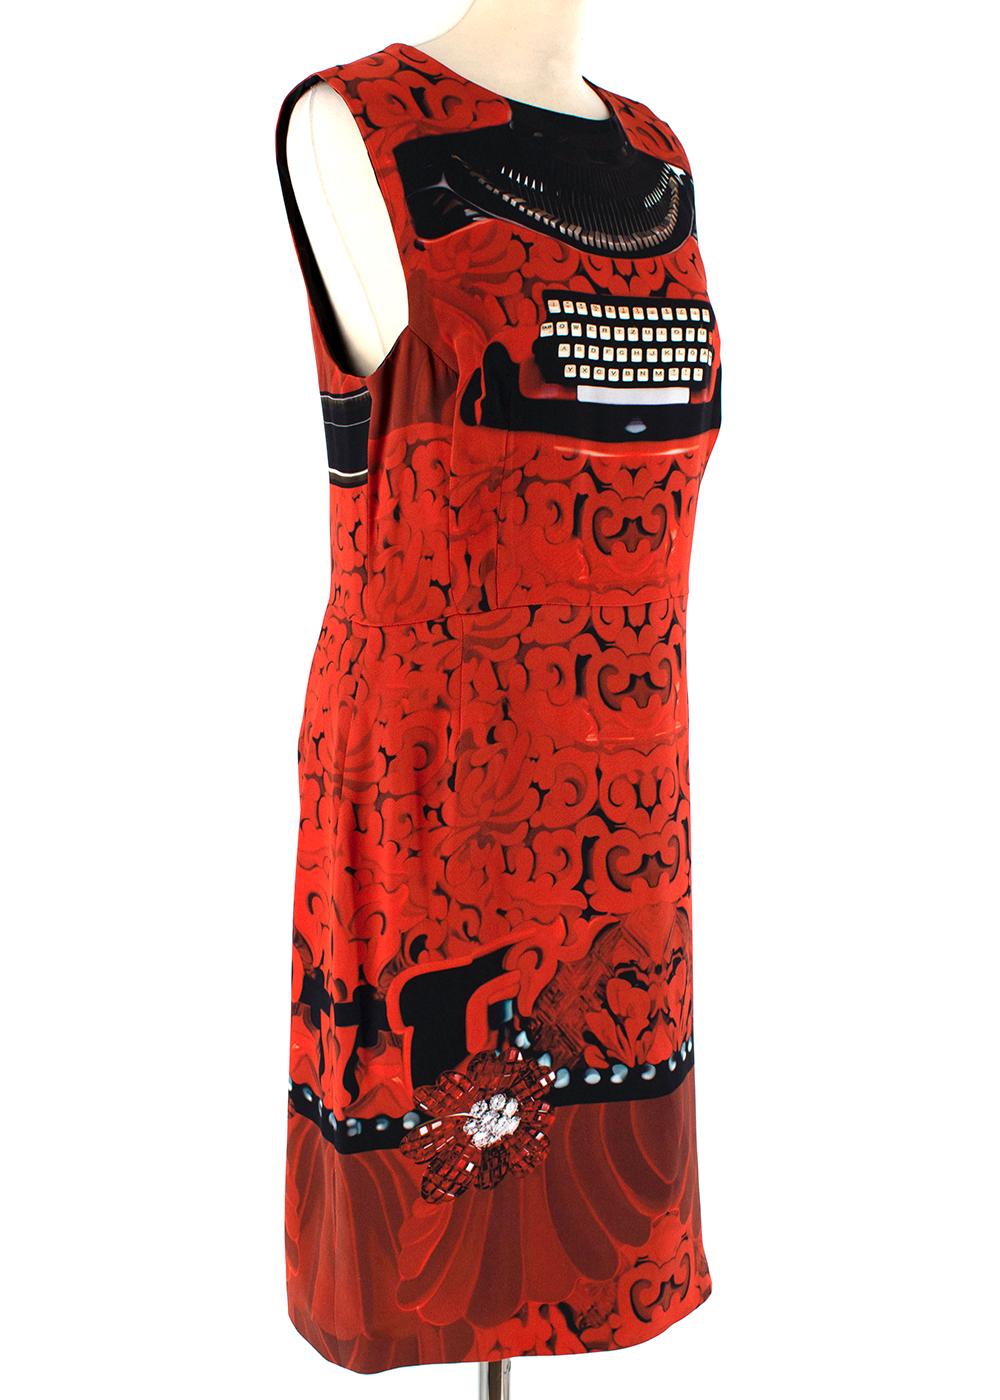 Mary Katrantzou Red Typewriter Print Shift Dress 

- Red & black pattern print 
- Sleeveless
- Shift style
- Invisible back zip fastening
- Round neck 
- Lined 
- Midi length  

Materials:
Main fabric:
- 100% Silk 
Lining:
- 98% Acetate 
- 2%